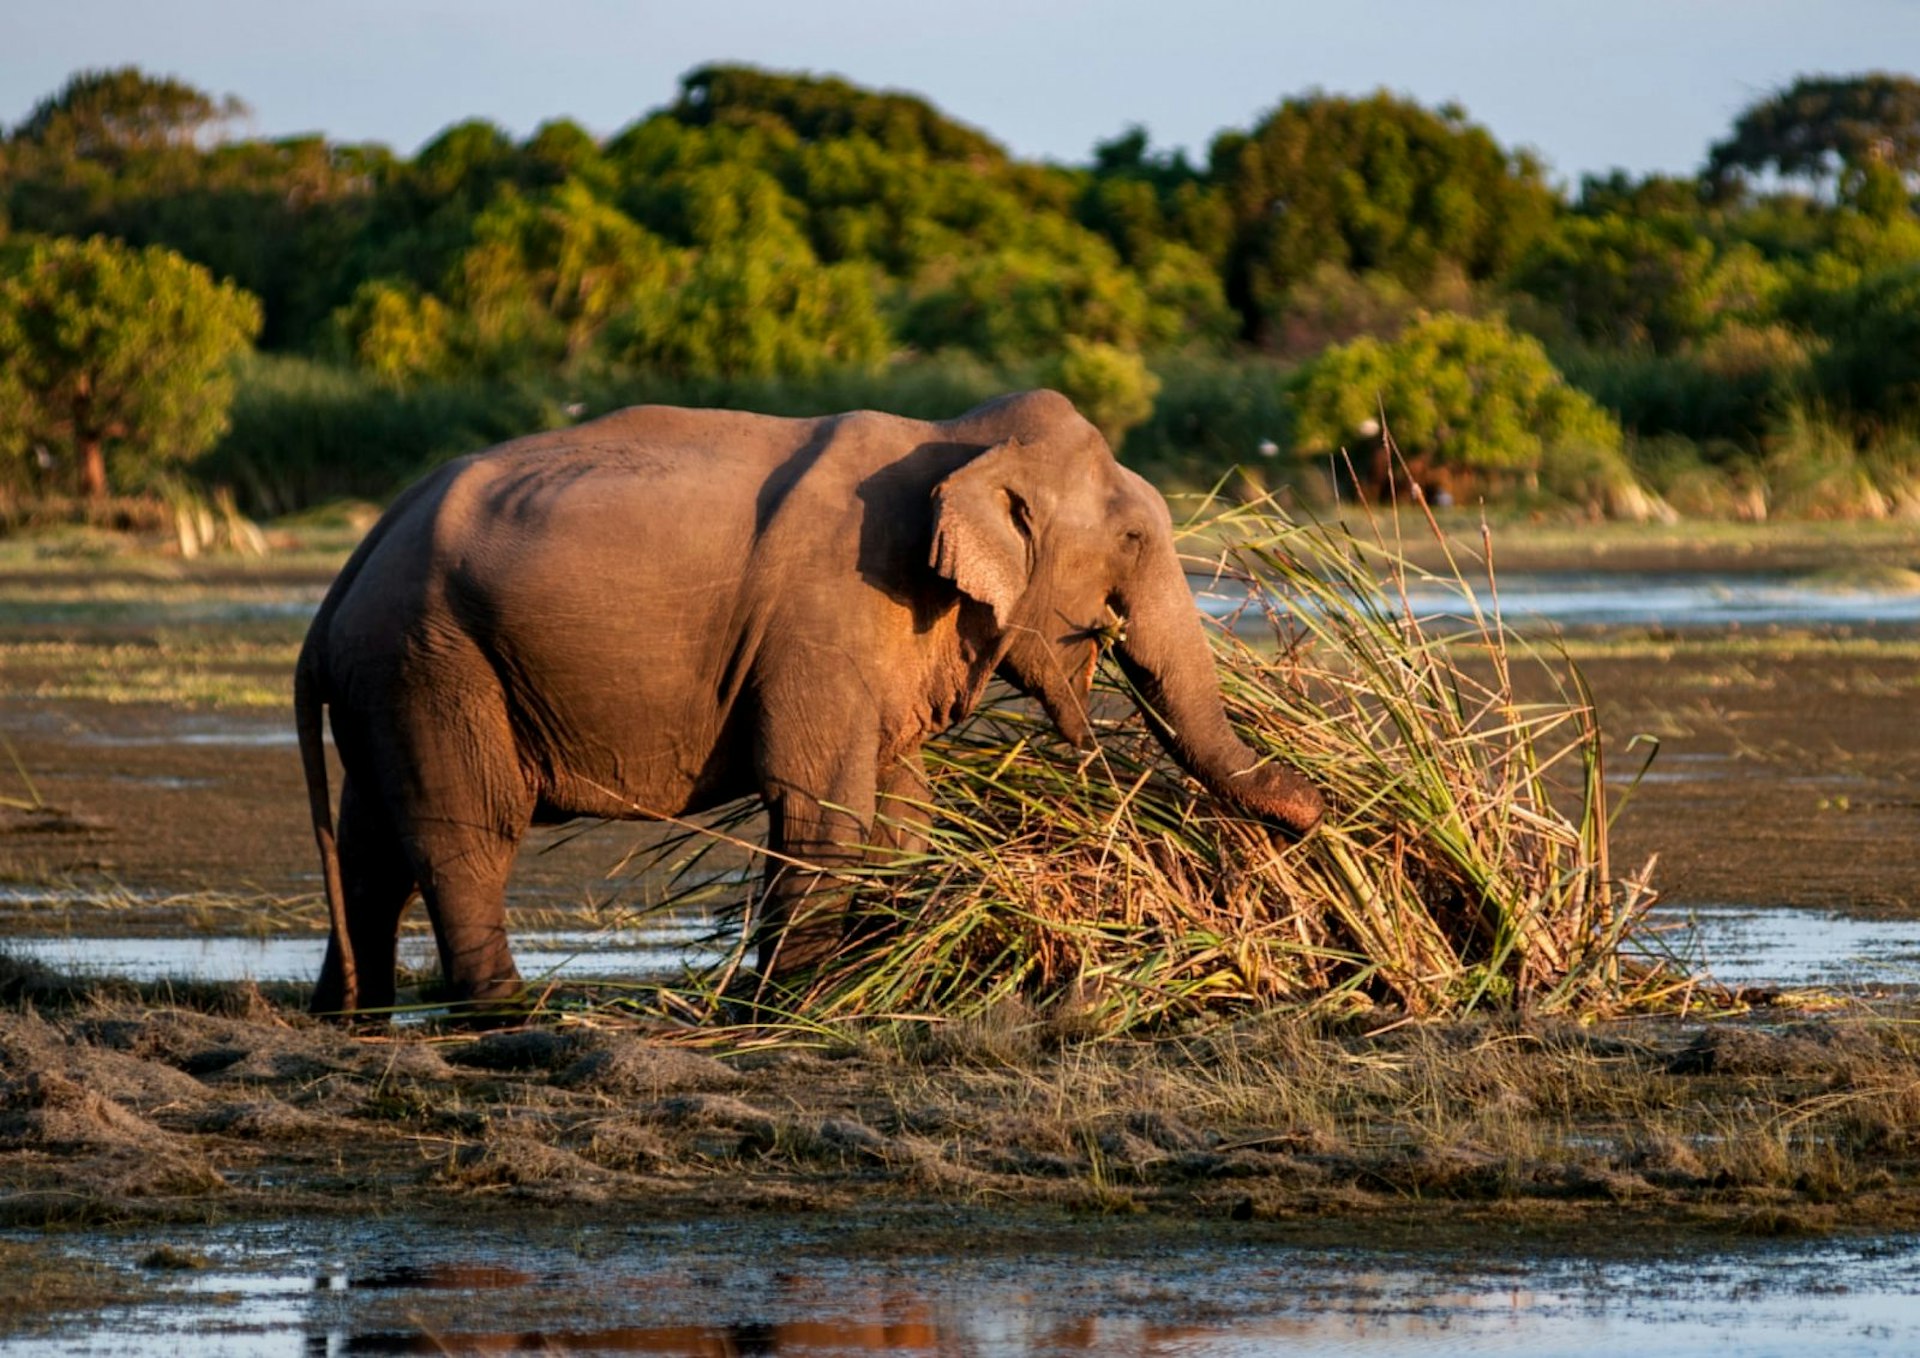 Wild elephants roam the jungles and marshes of Kumana National Park © Shani Miller / Getty Images